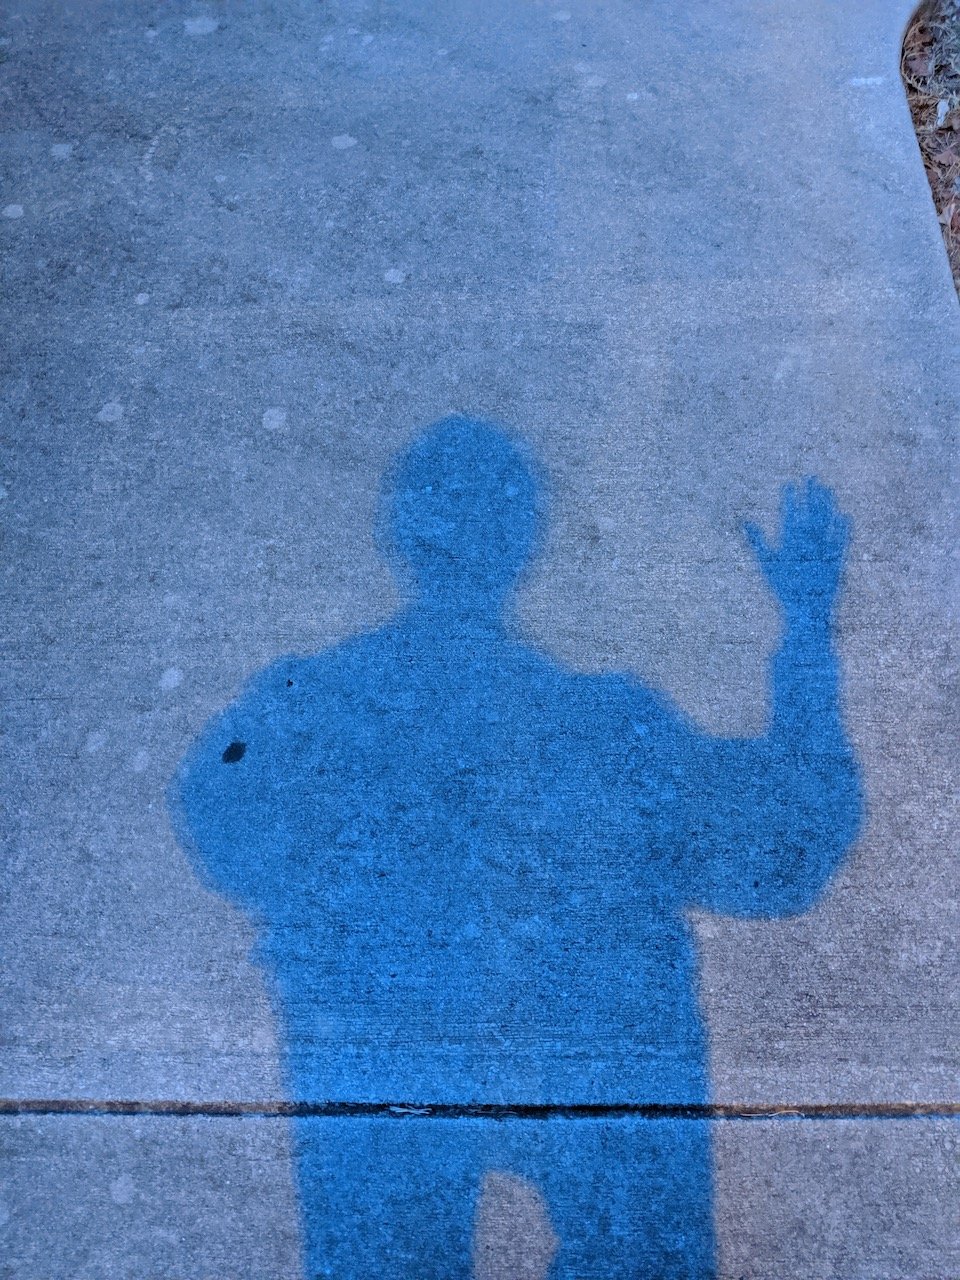 Shadow of standing figure with one arm raised as if waving hello